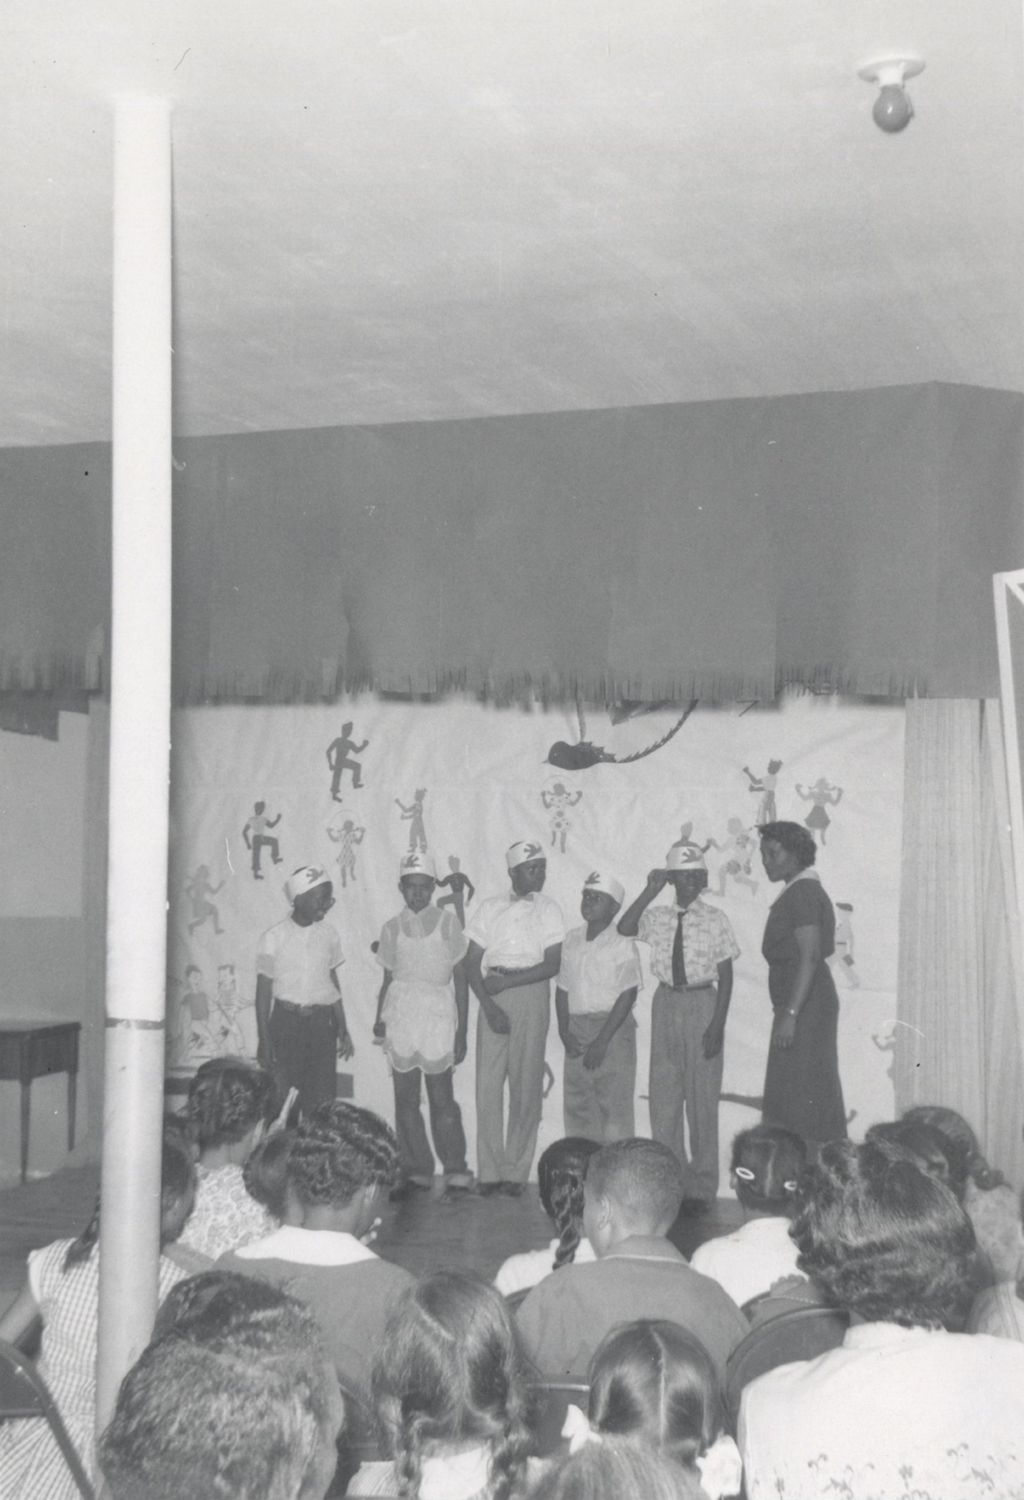 Five young men on stage at an event at Parkway Community House